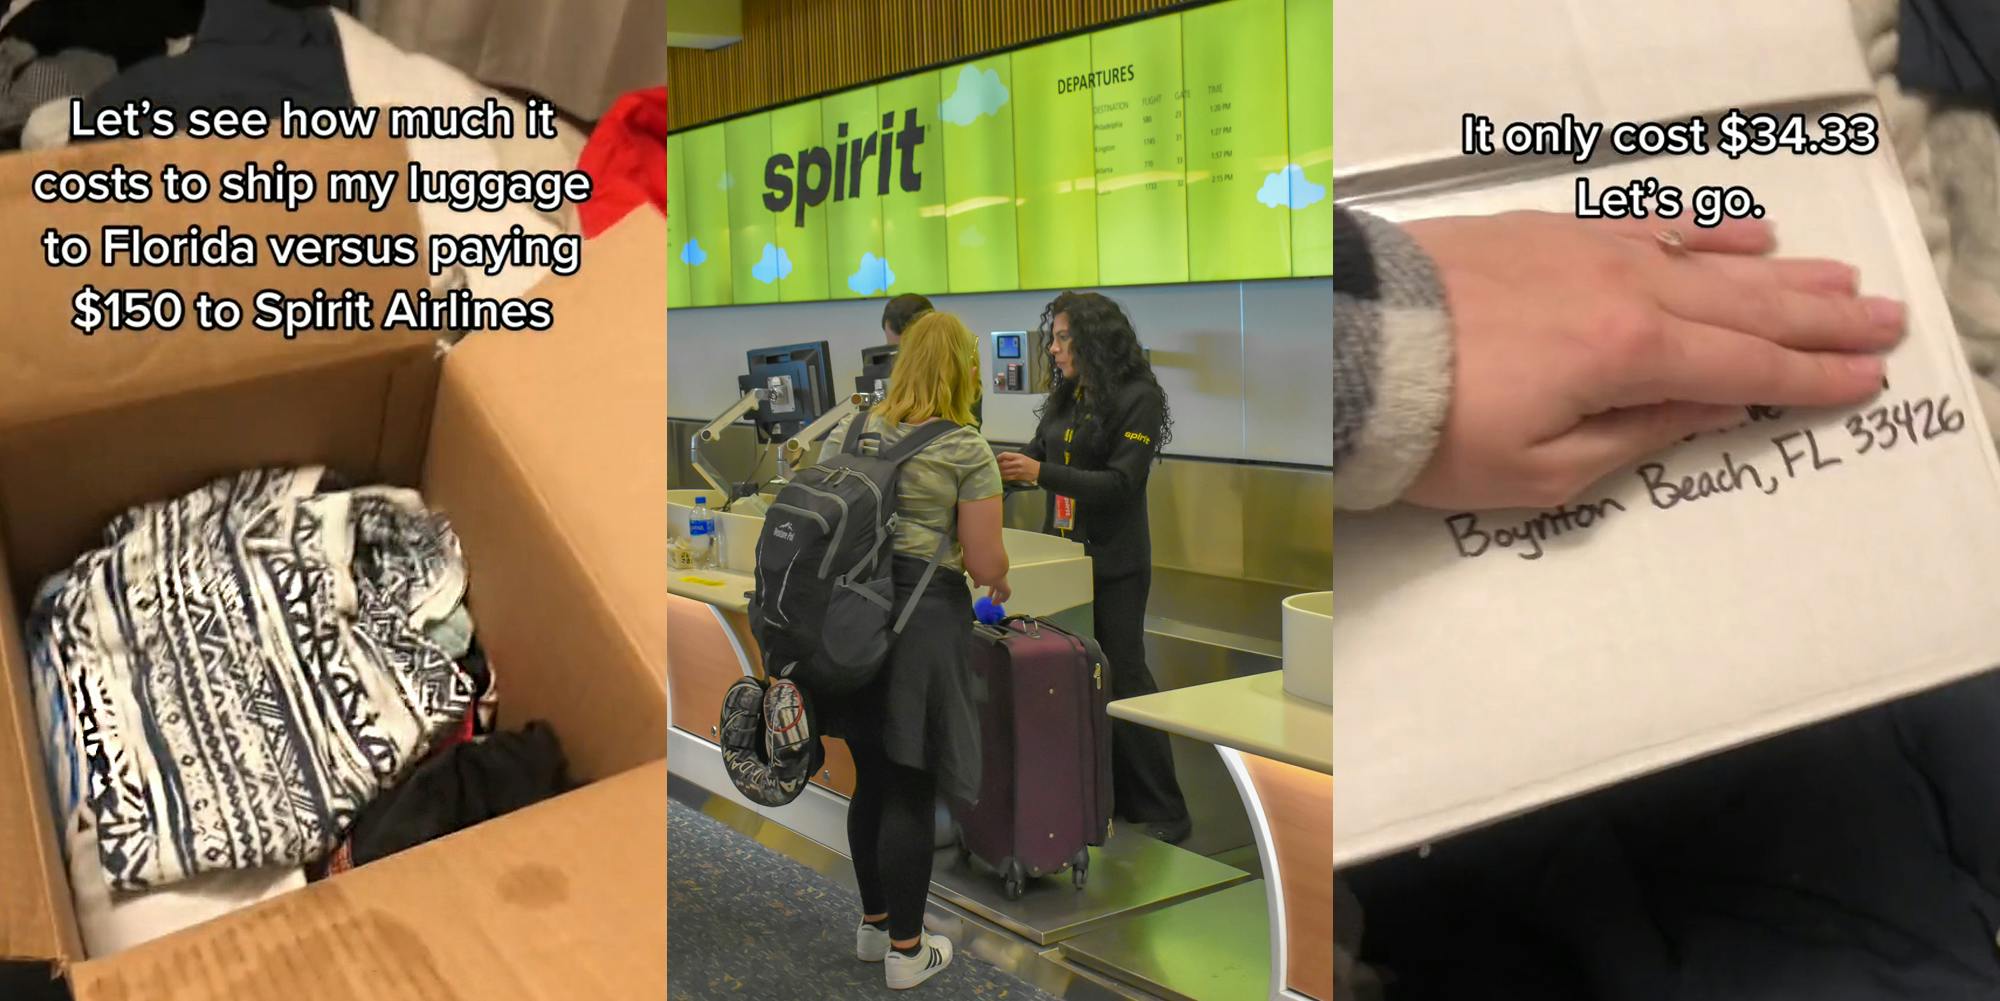 Spirit Airlines Guest Ships Luggage for $35 Instead of Paying $150